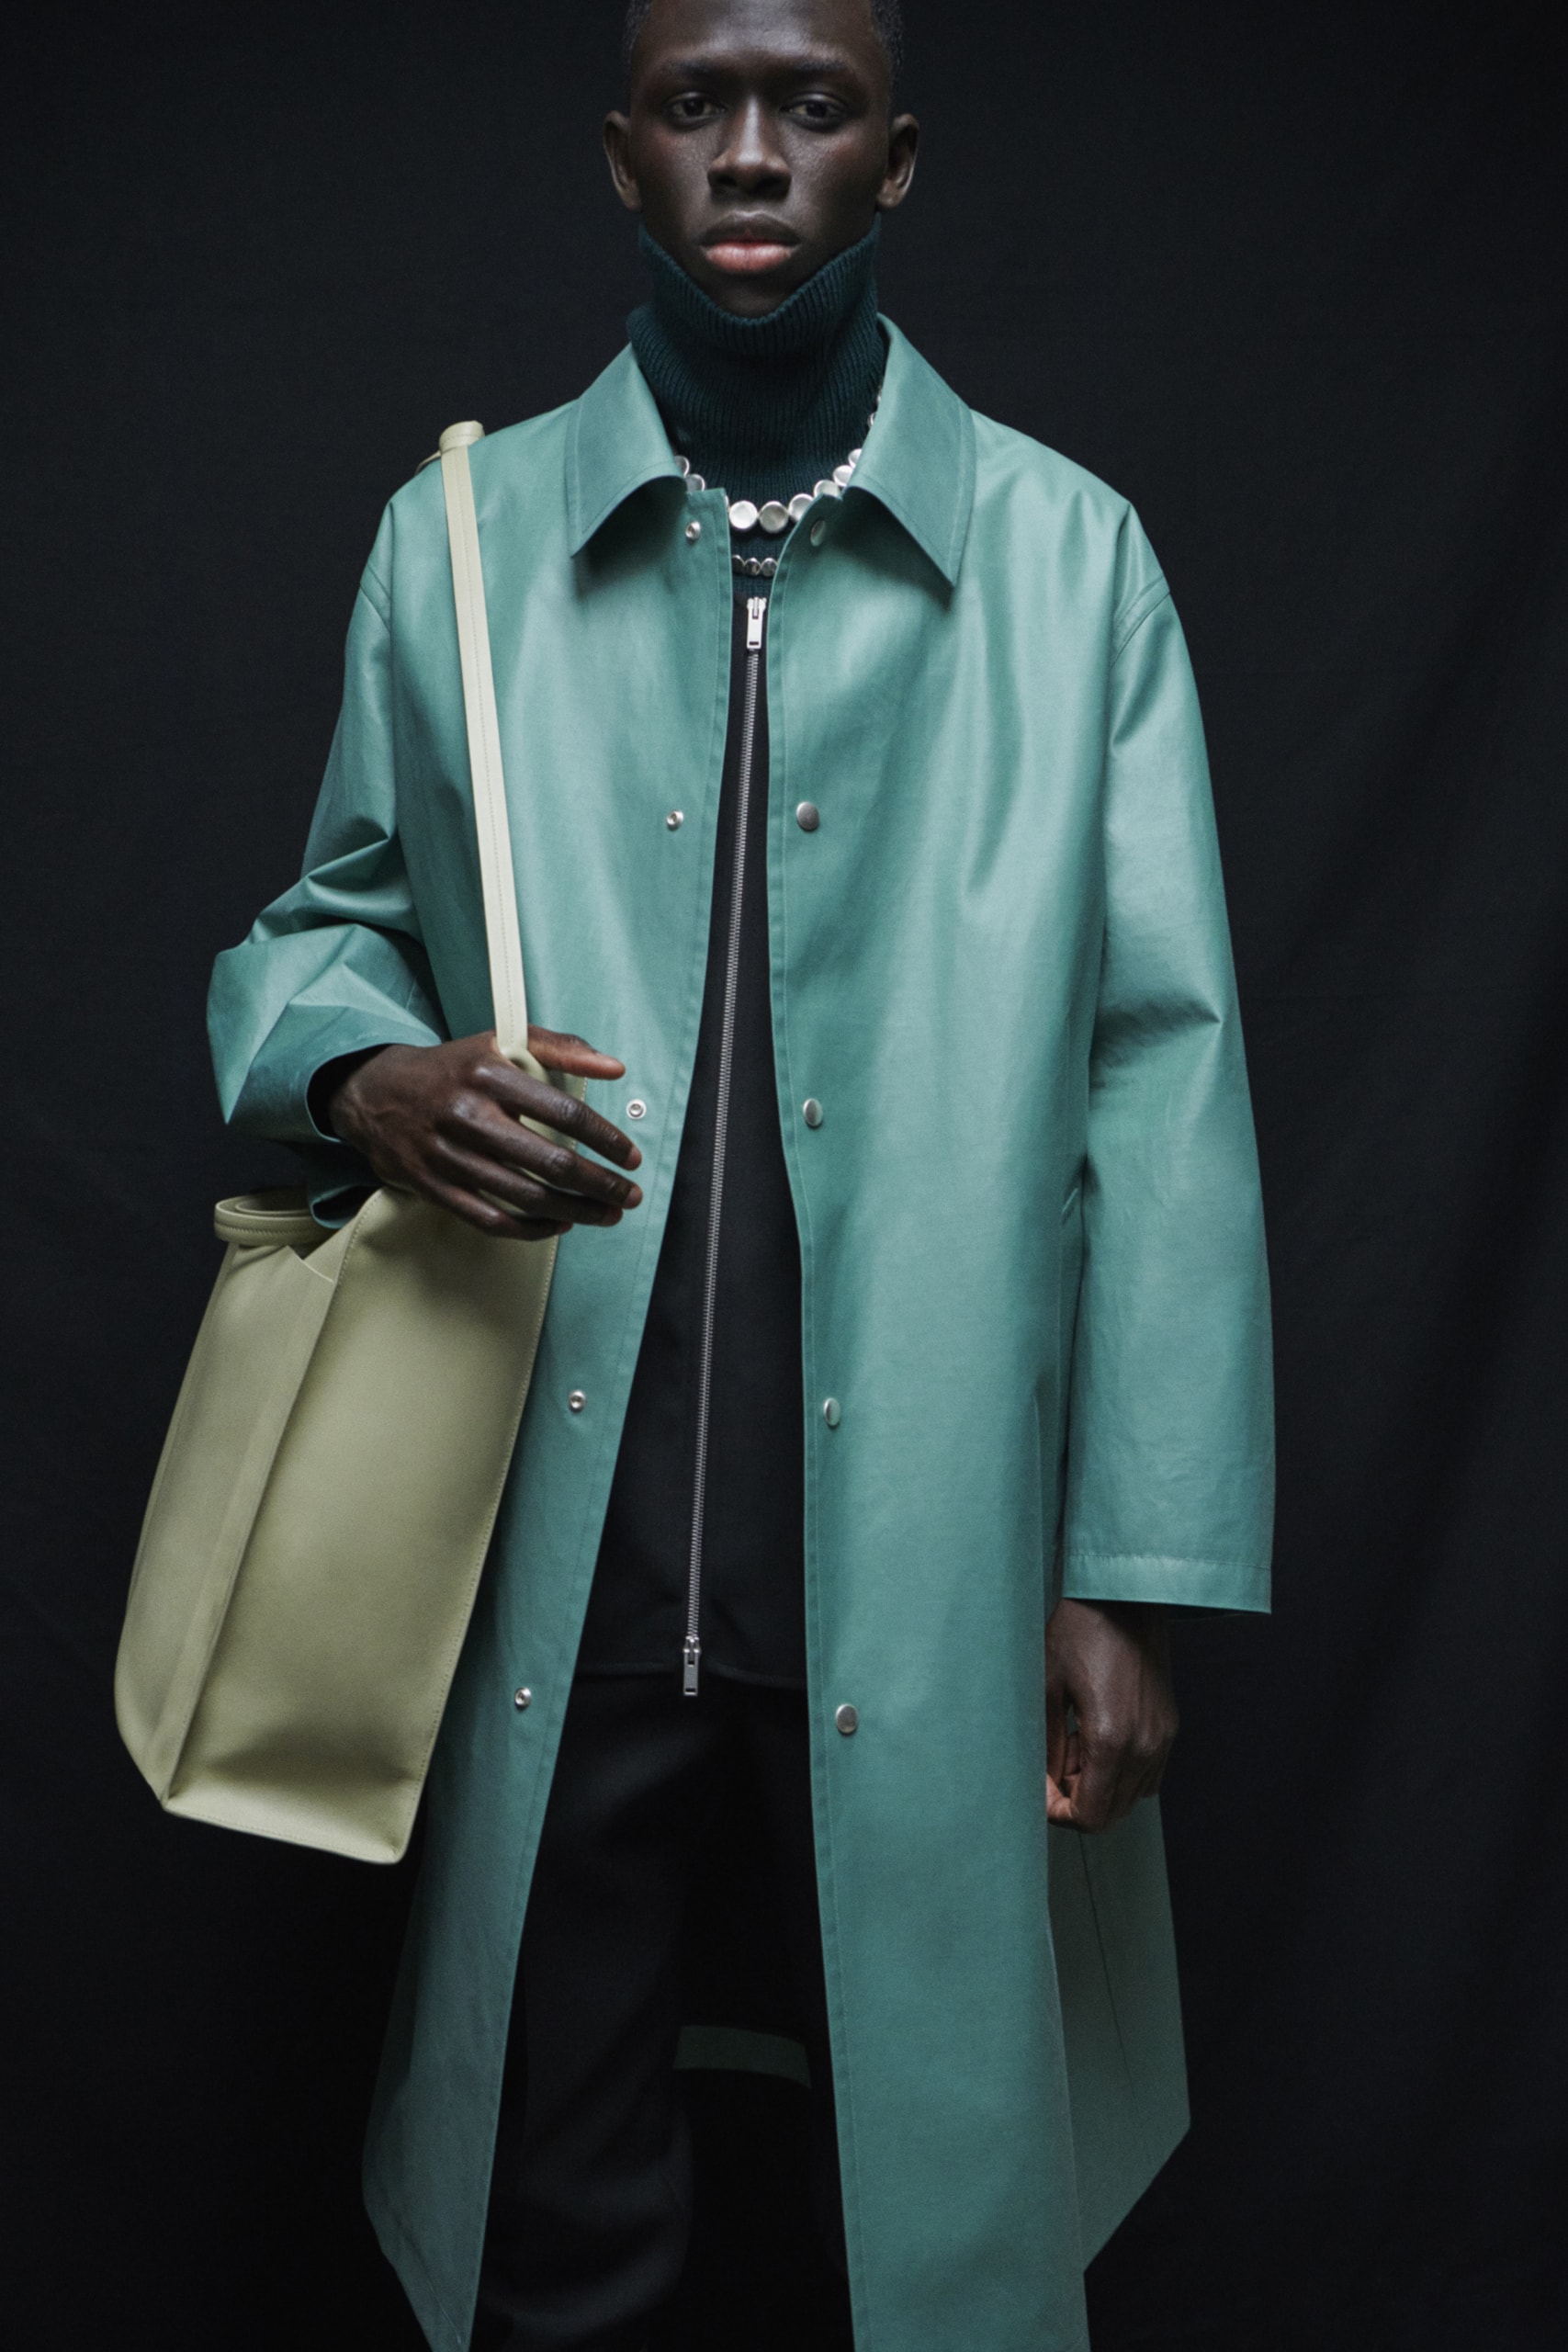 jil sander menswear fall winter fw21 collection lookbook teal turquoise leather coat bag